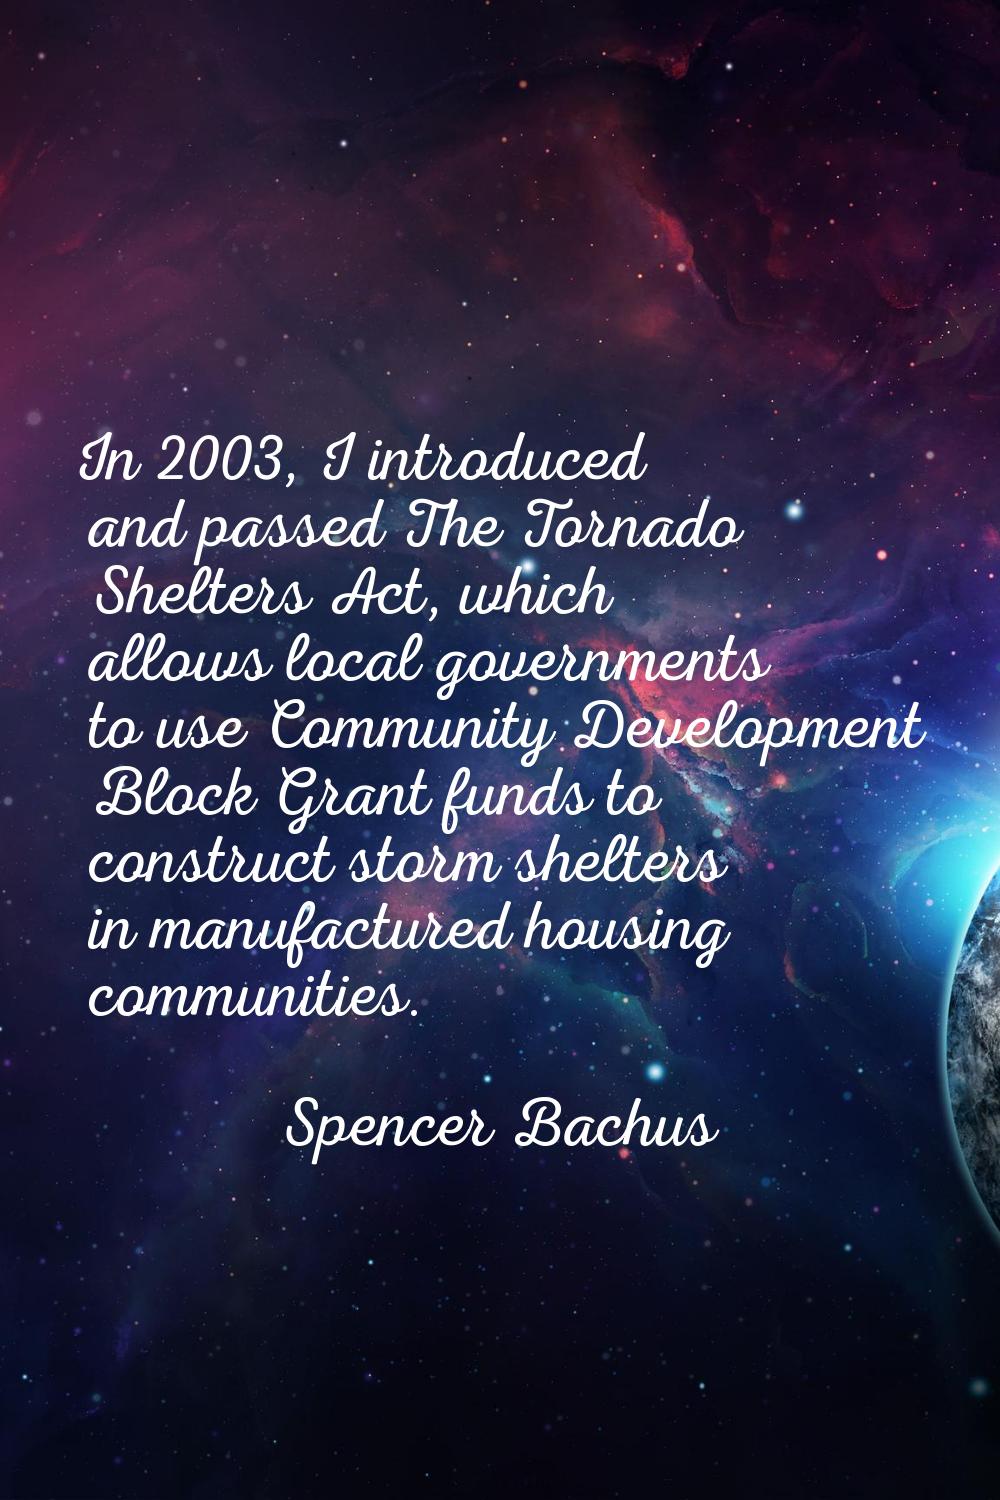 In 2003, I introduced and passed The Tornado Shelters Act, which allows local governments to use Co